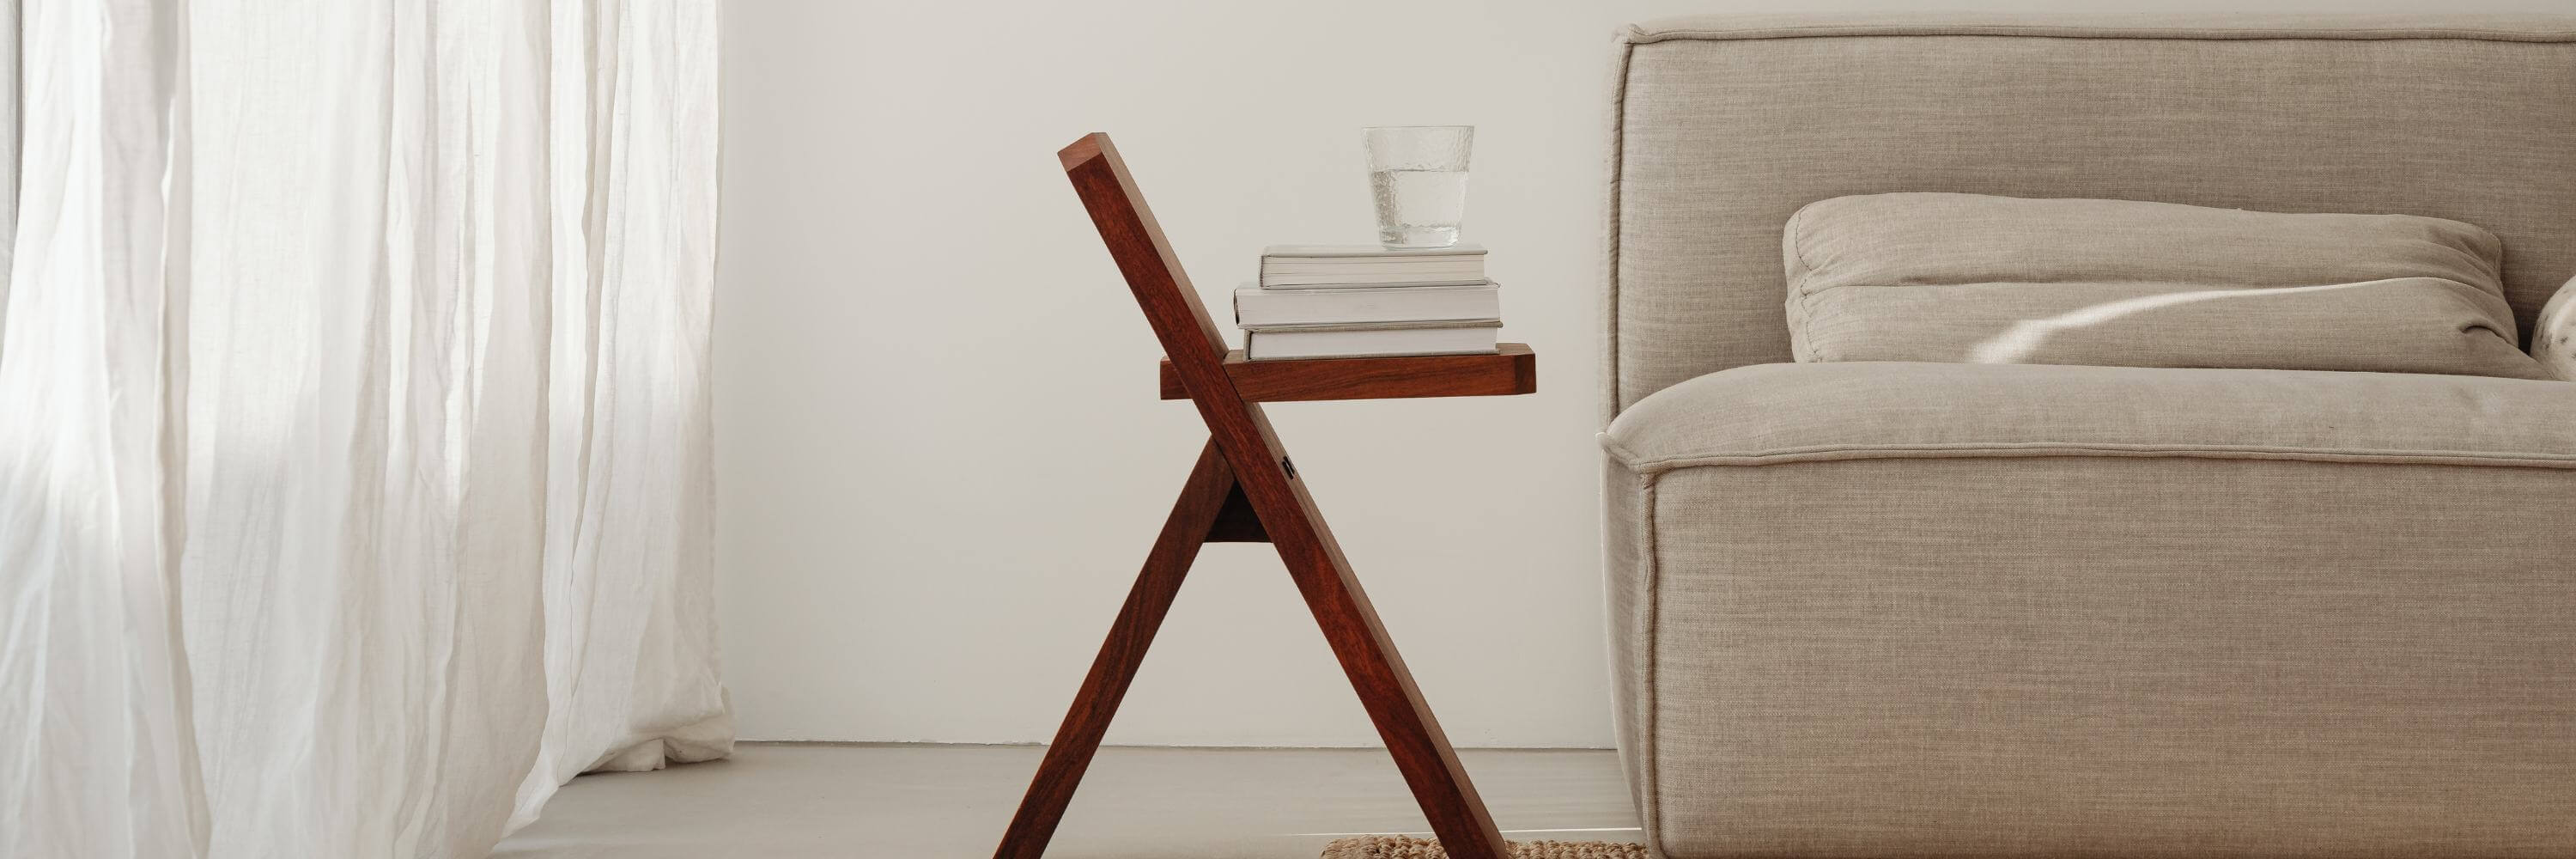 A wooden chair as side table decorated with books